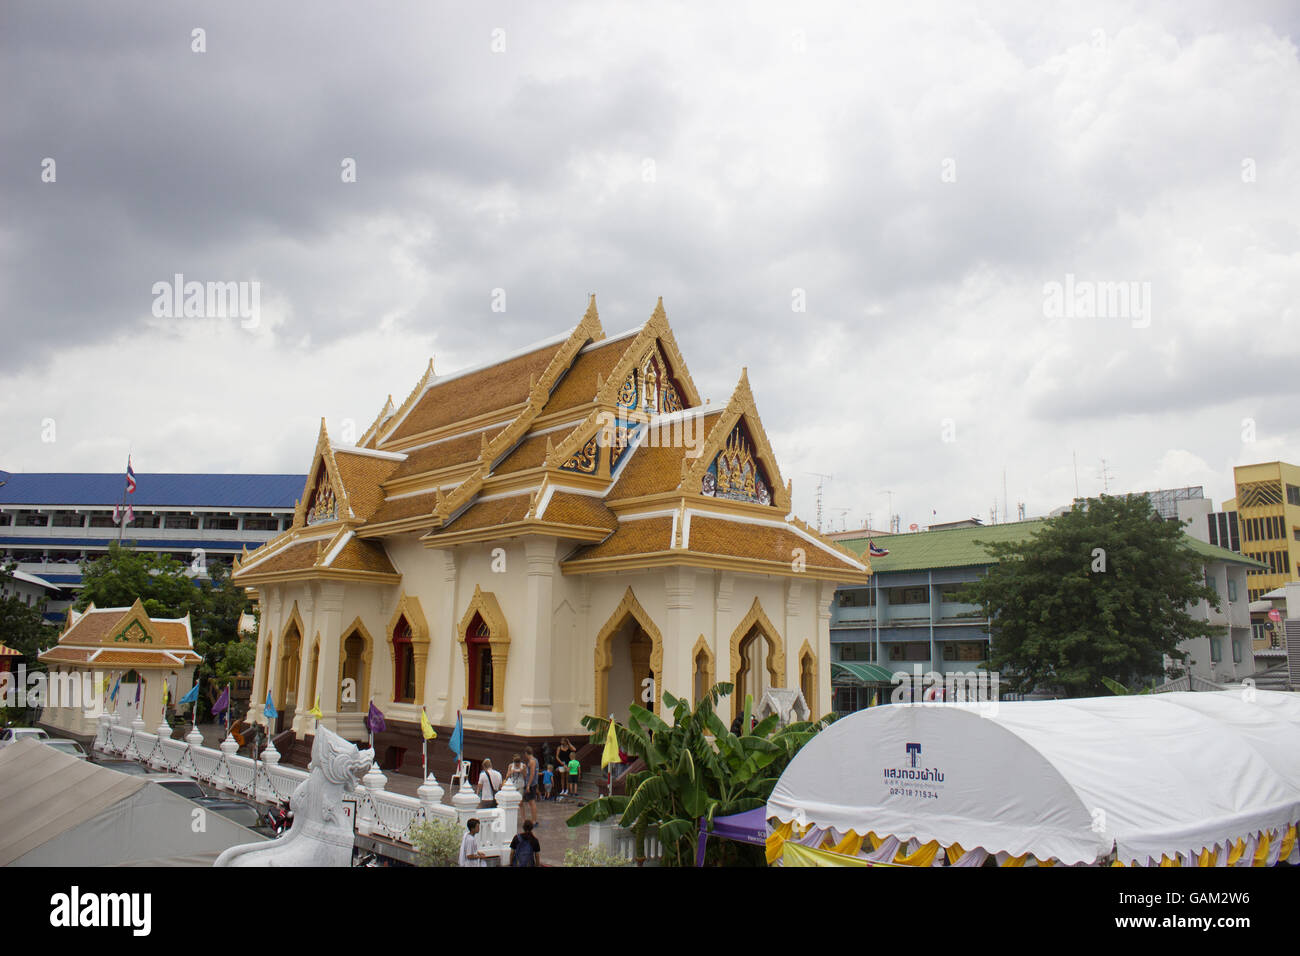 Wal traimit Golden Buddha temple in Bangkok city temple tour having the biggest gold statue of Buddha Stock Photo